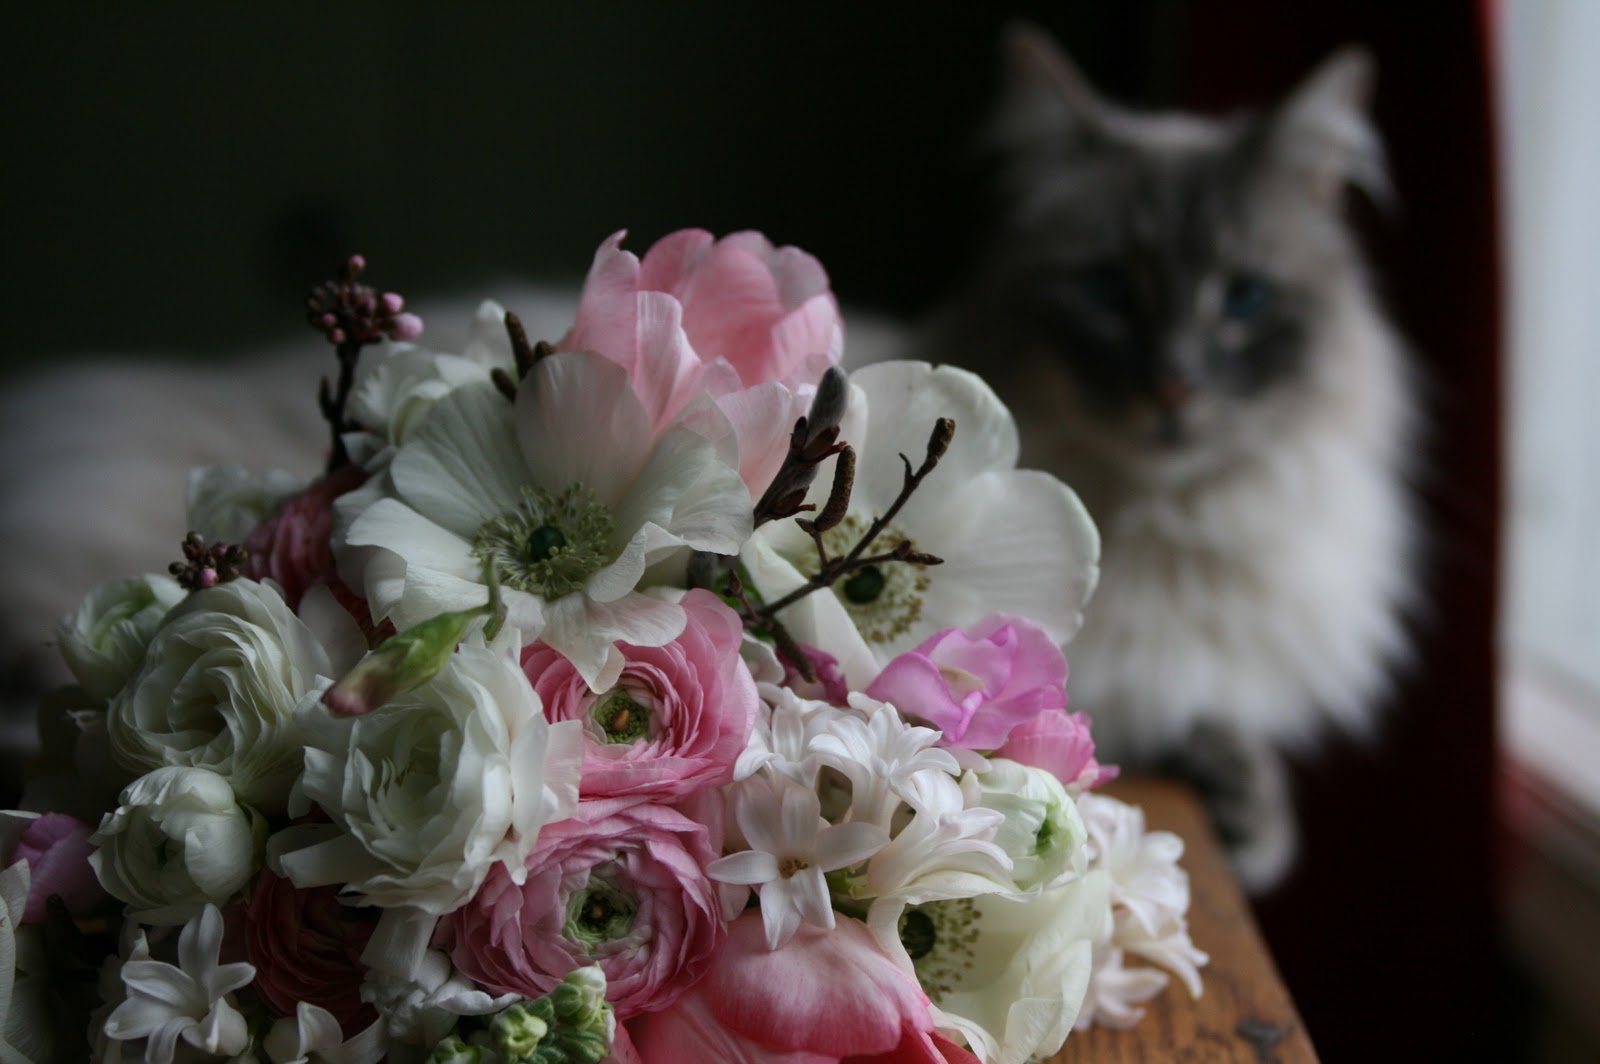 A cat sitting with a bouquet of flowers